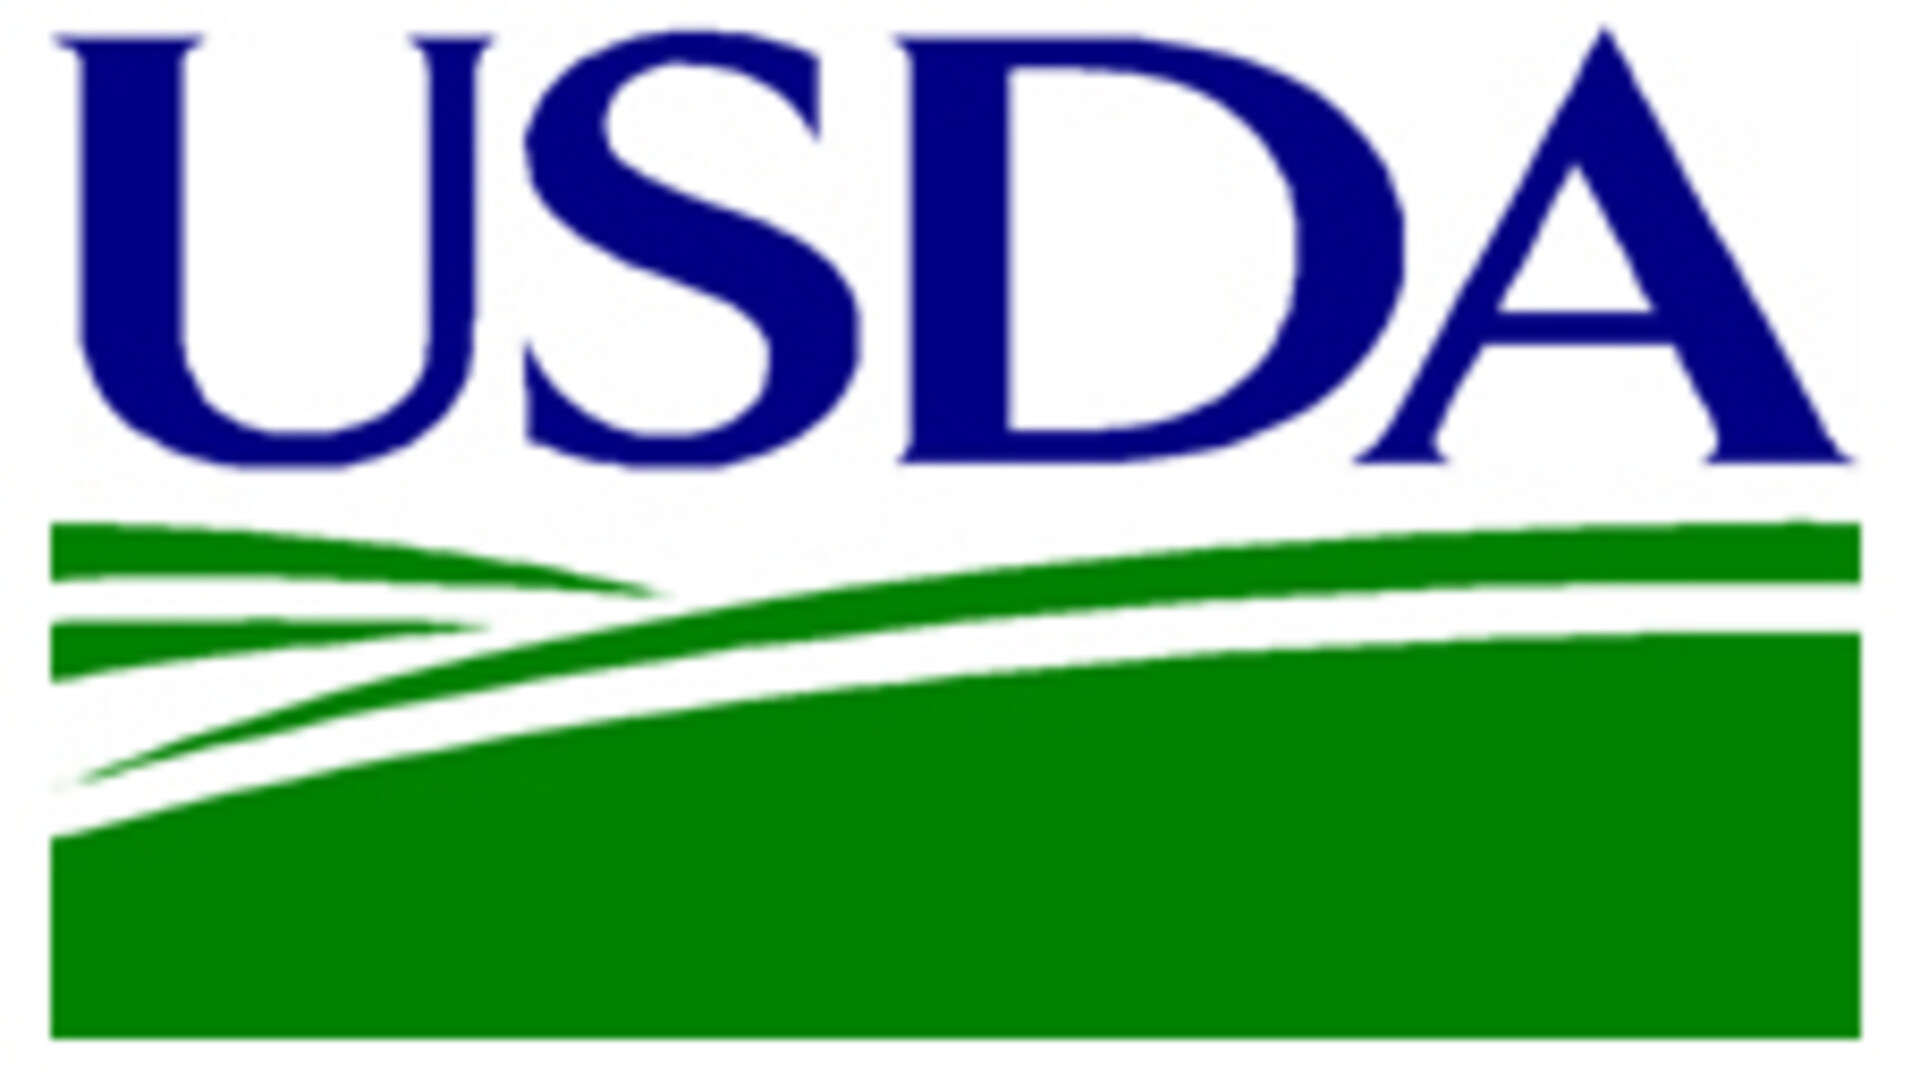 USDA and Specialty Crops Pt 2